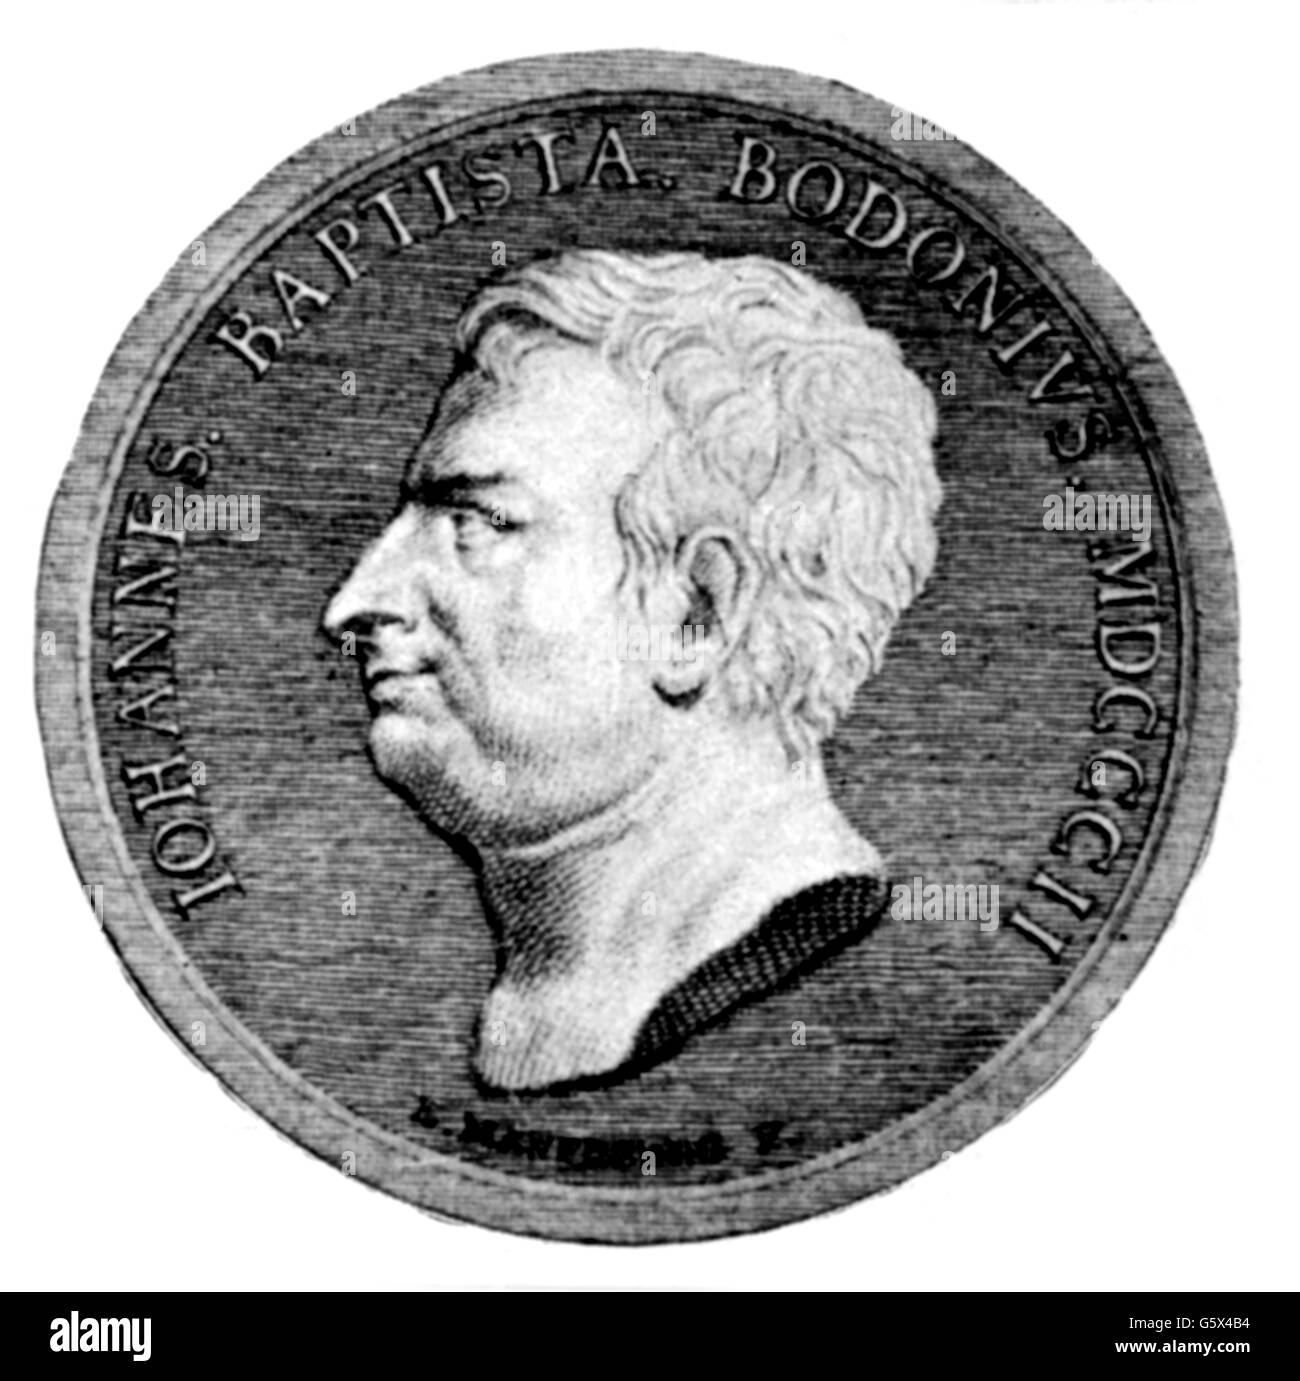 Bodoni, Giambattista, 16.2.1740 - 20.11.1813, Italian printer, and publisher, portrait, after coin, wood engraving, 19th century, , Stock Photo